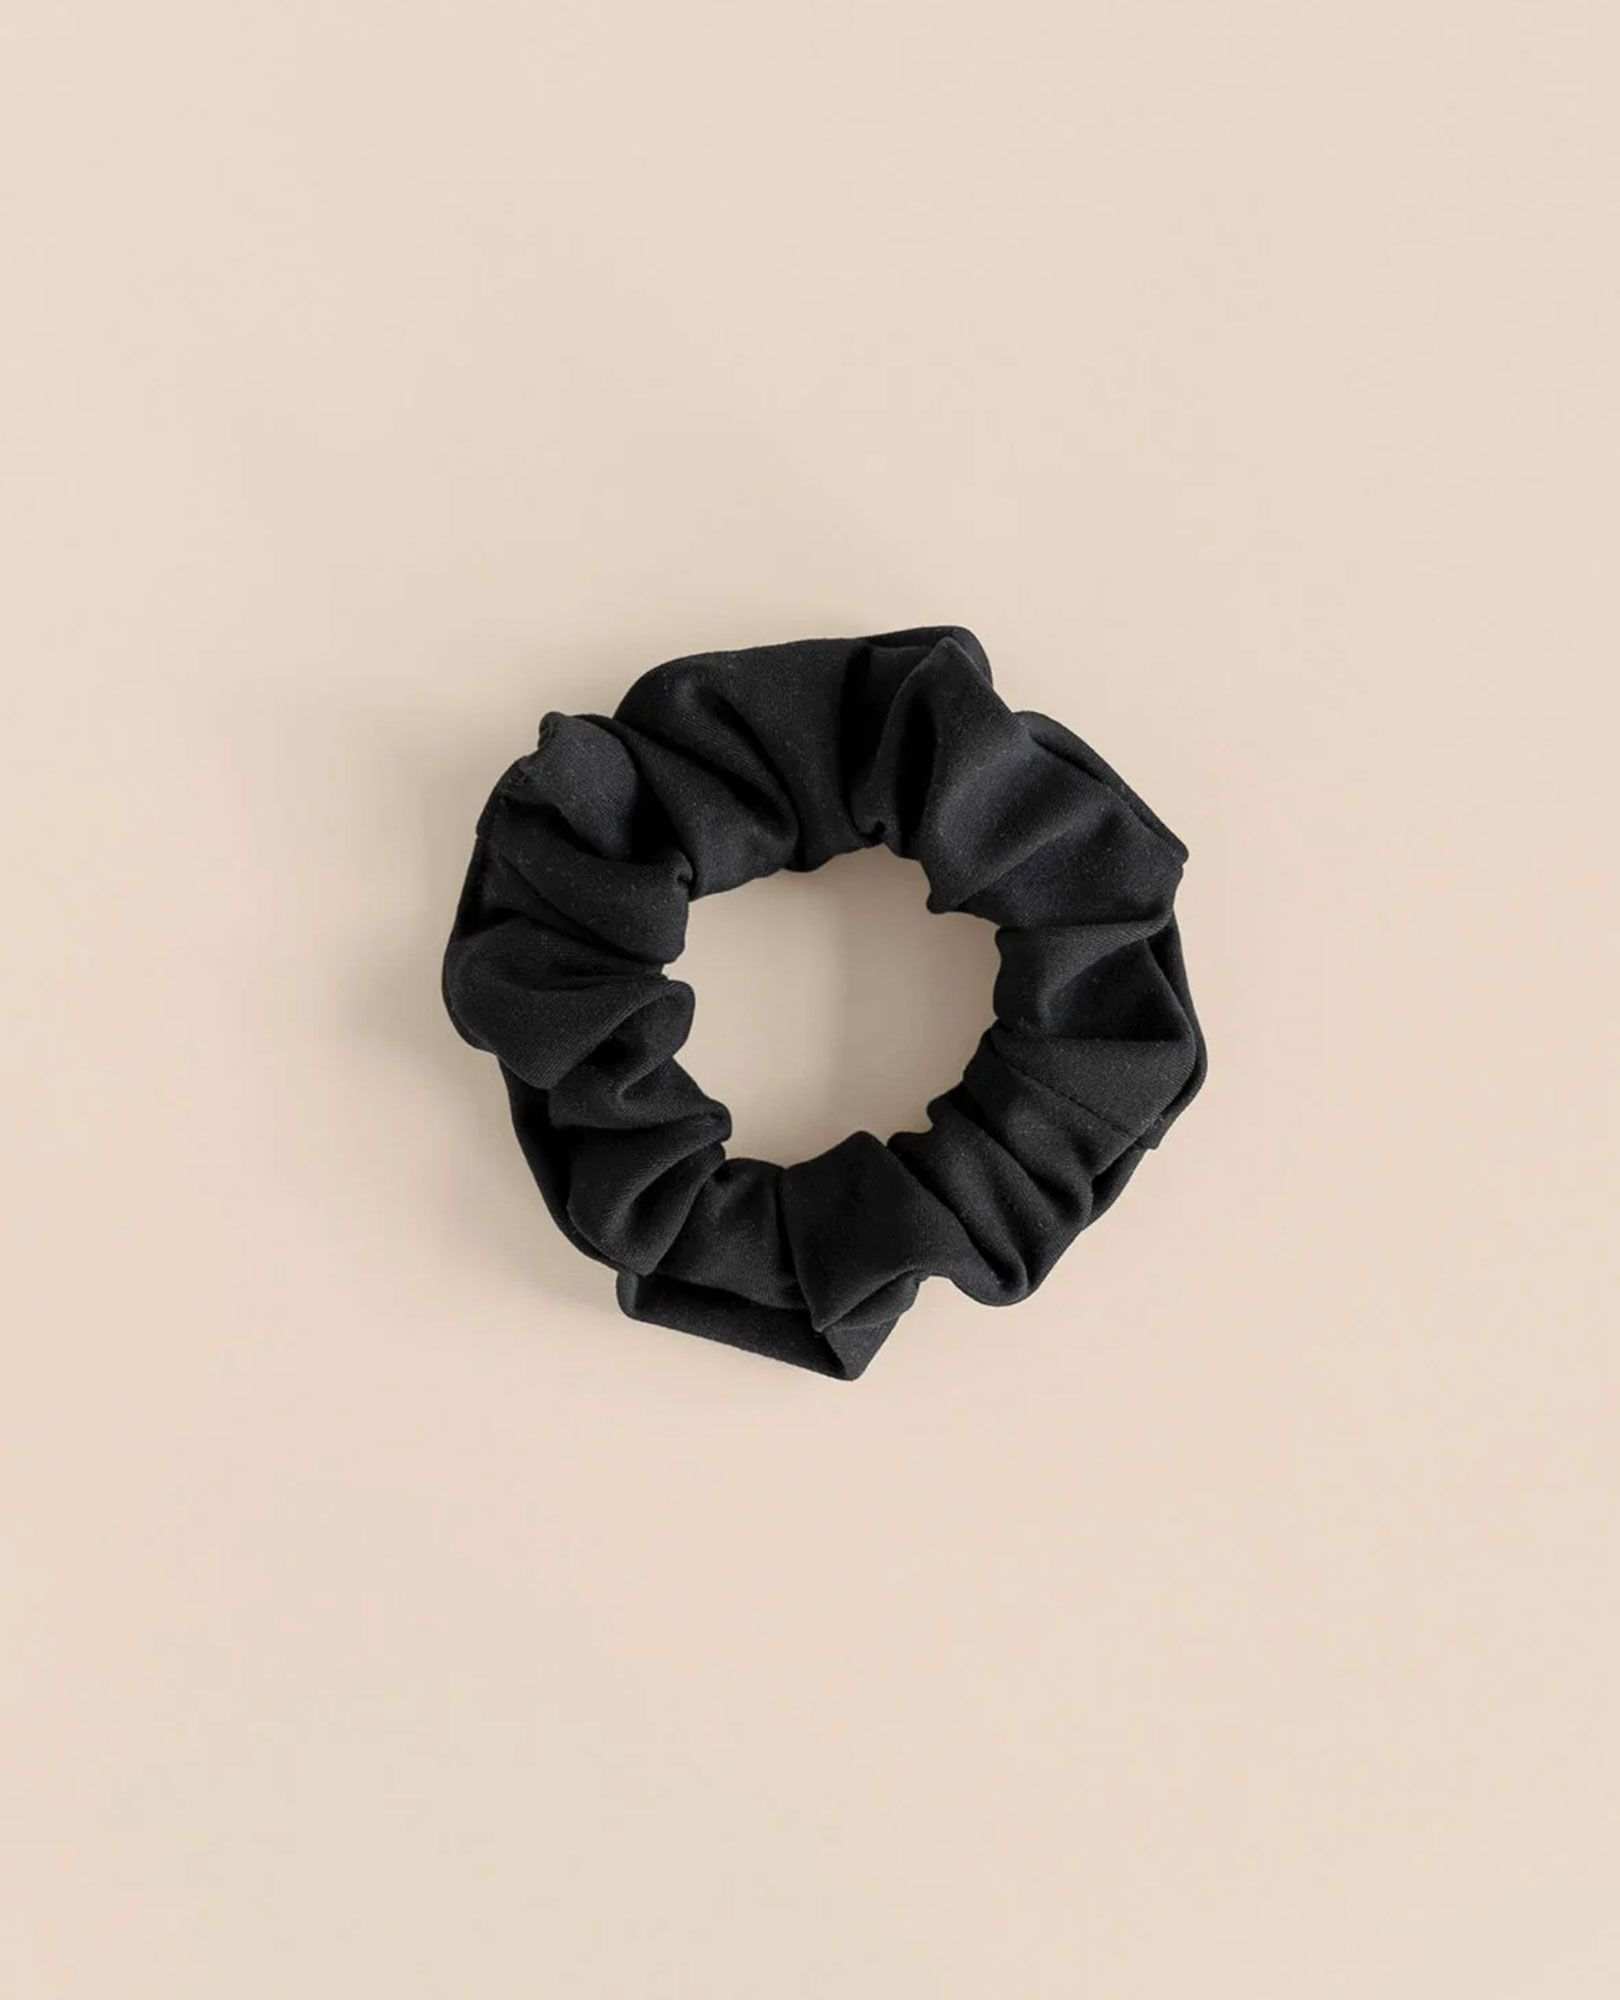 Sparkpick features Girlfriend Collective recycled scrunchie in eco fashion